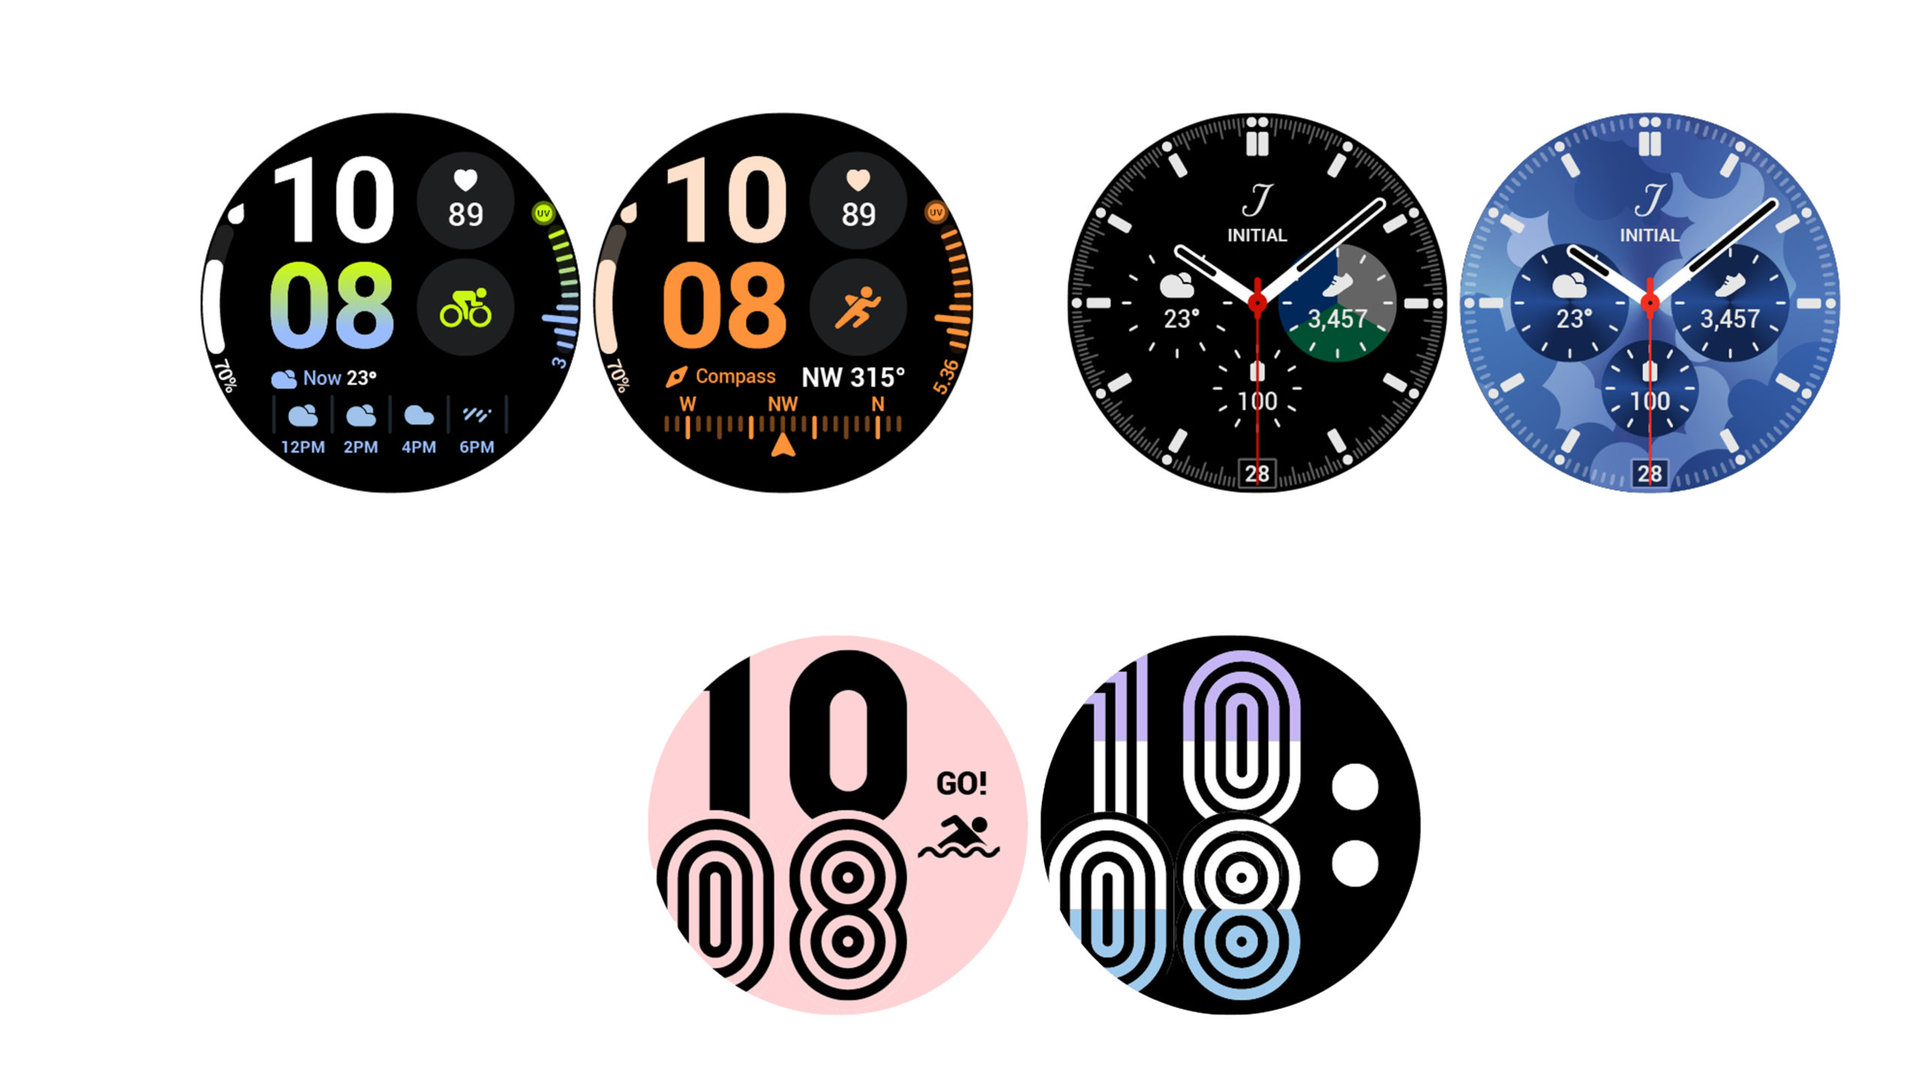 Leaked watch faces images of Wear OS 3.5 One UI Watch 45